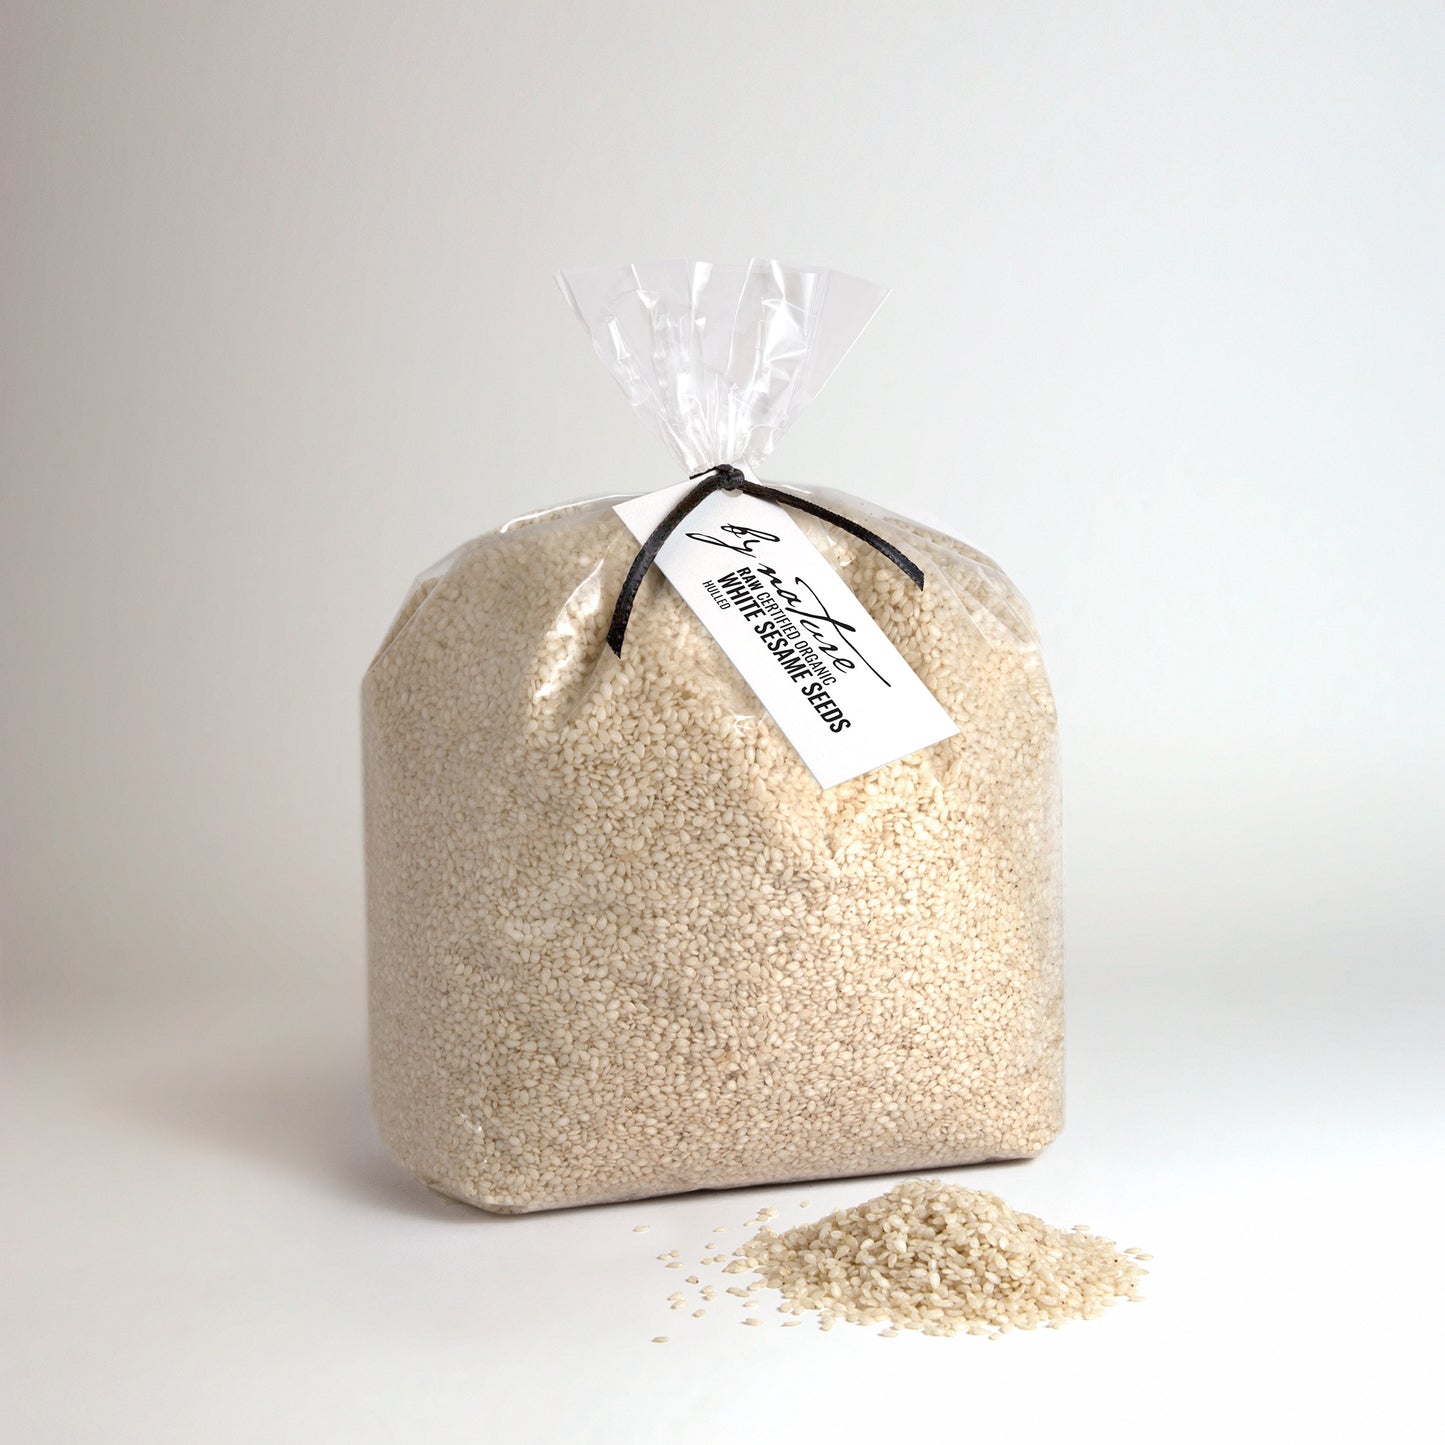 BY NATURE Sesame Seeds, 1kg - hulled, raw, certified organic at source.